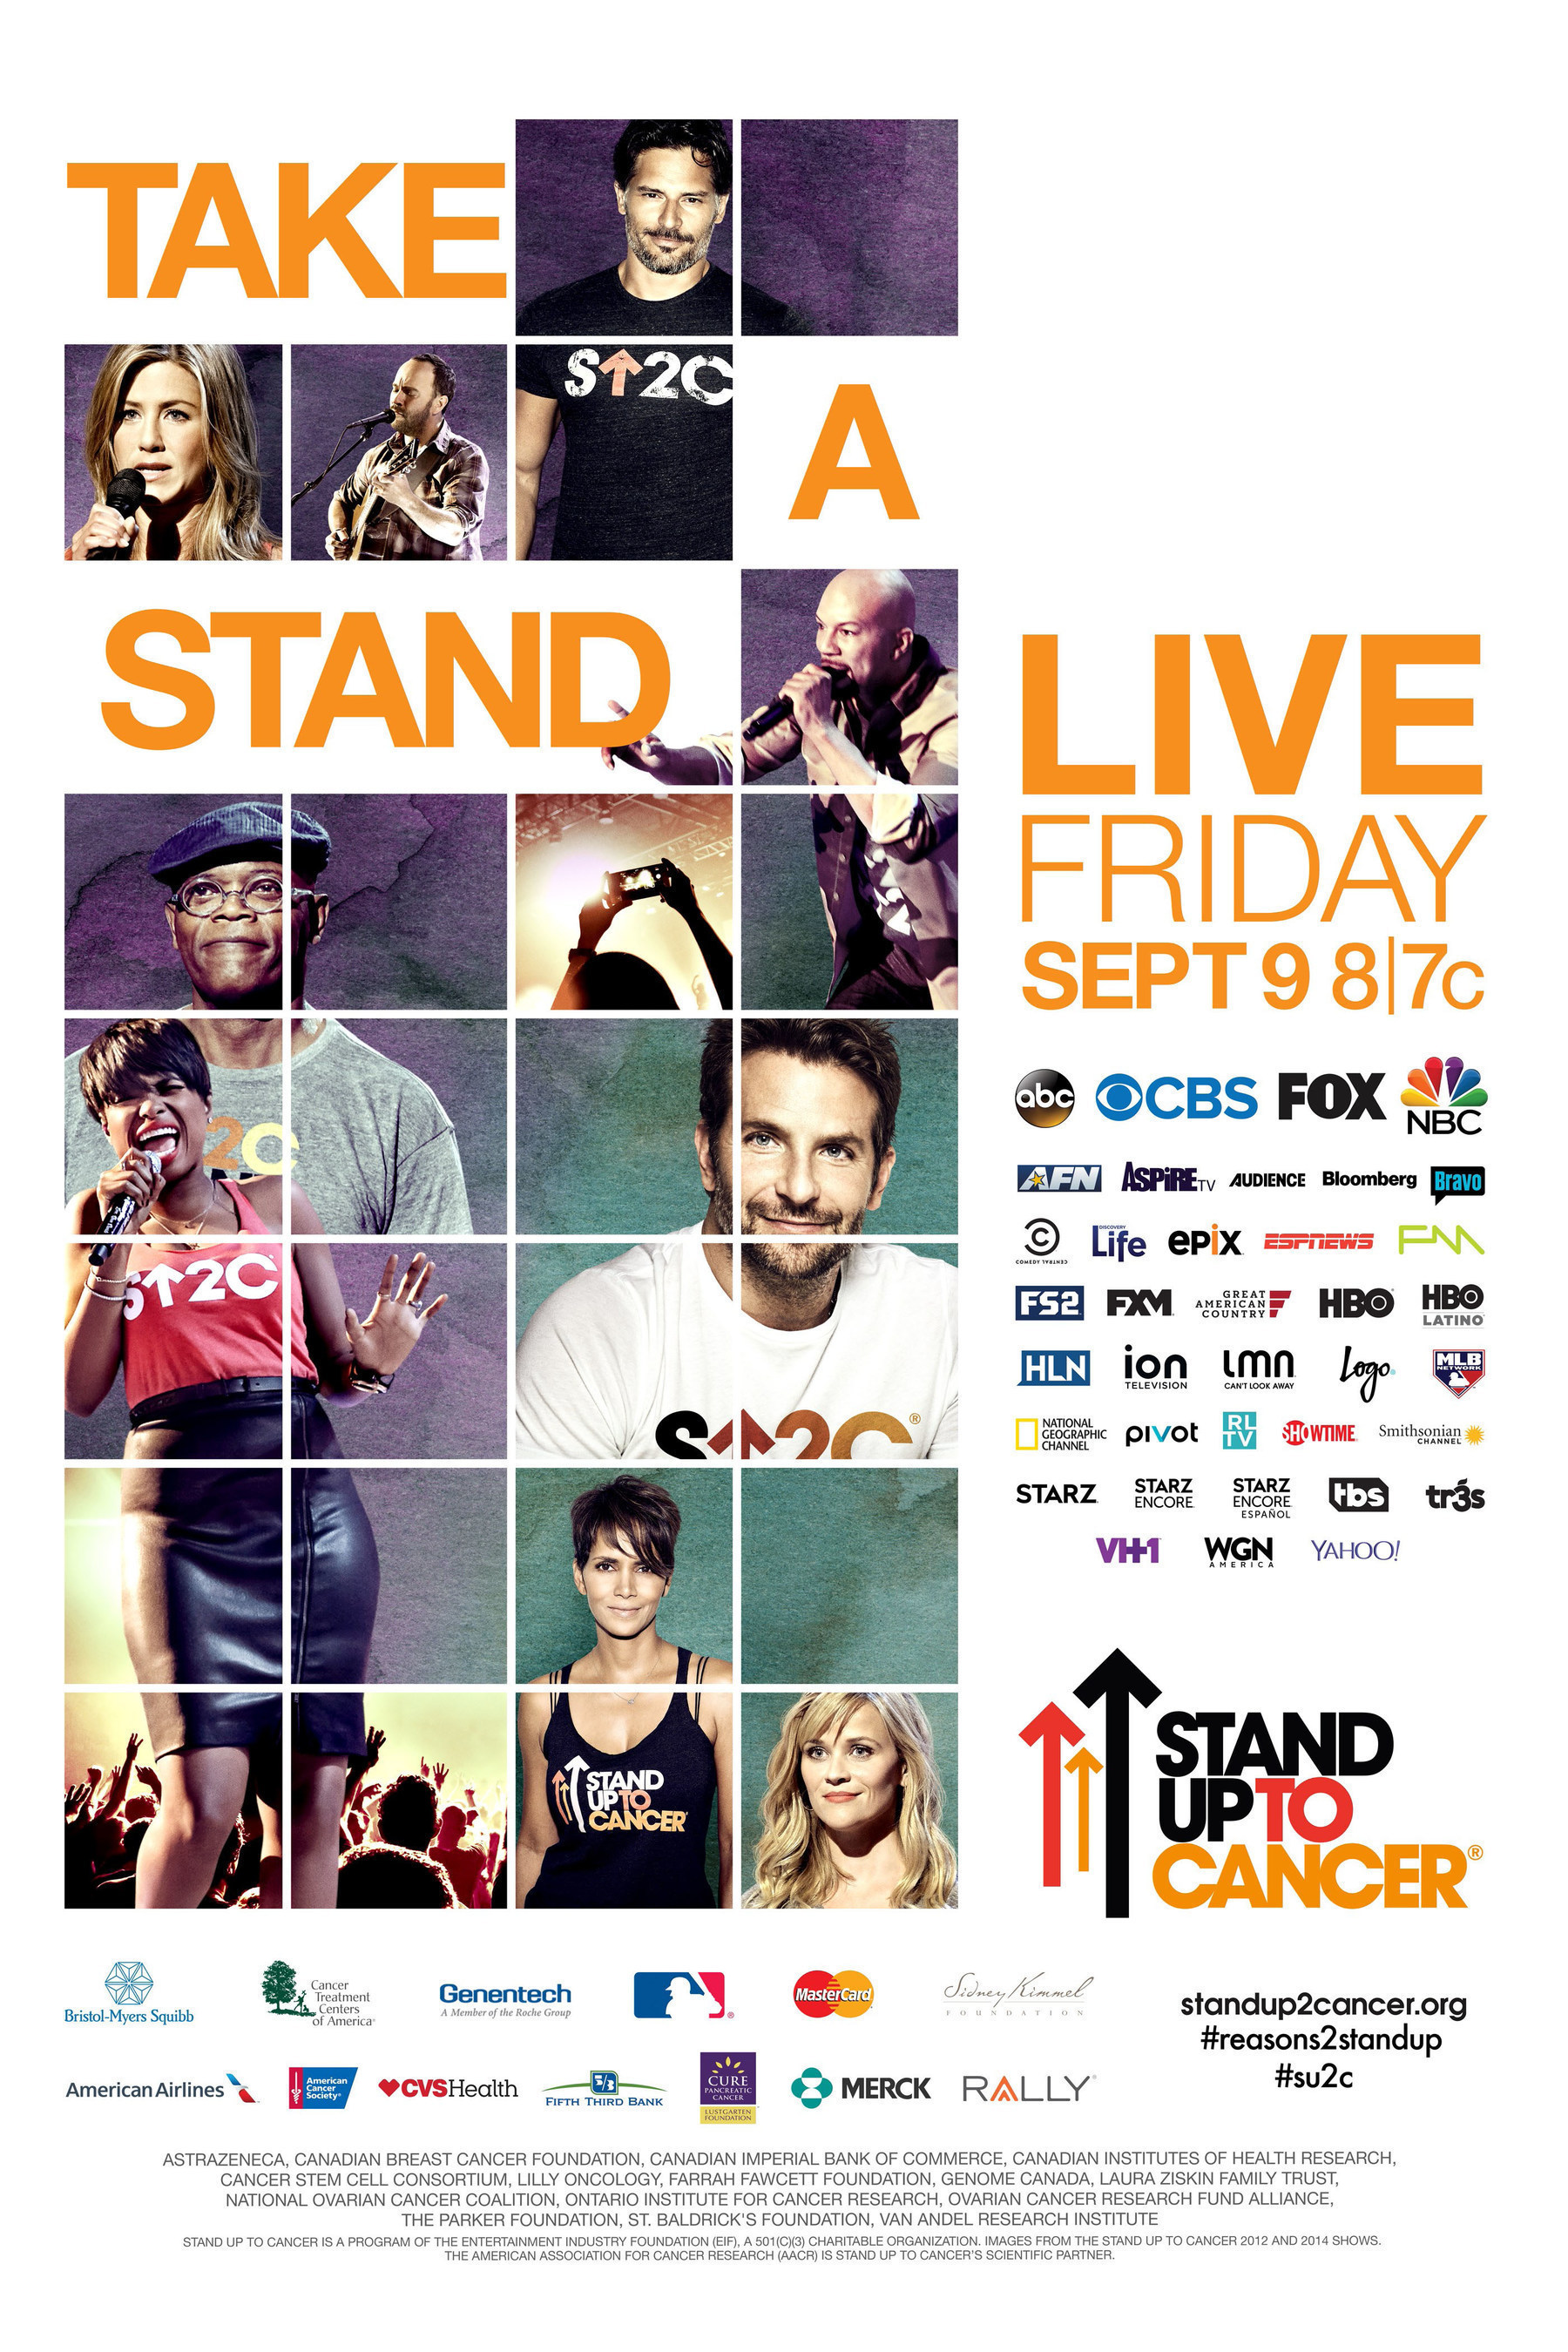 STAND UP TO CANCER RETURNS FOR FIFTH LIVE ROADBLOCK TELECAST FRIDAY, SEPTEMBER 9